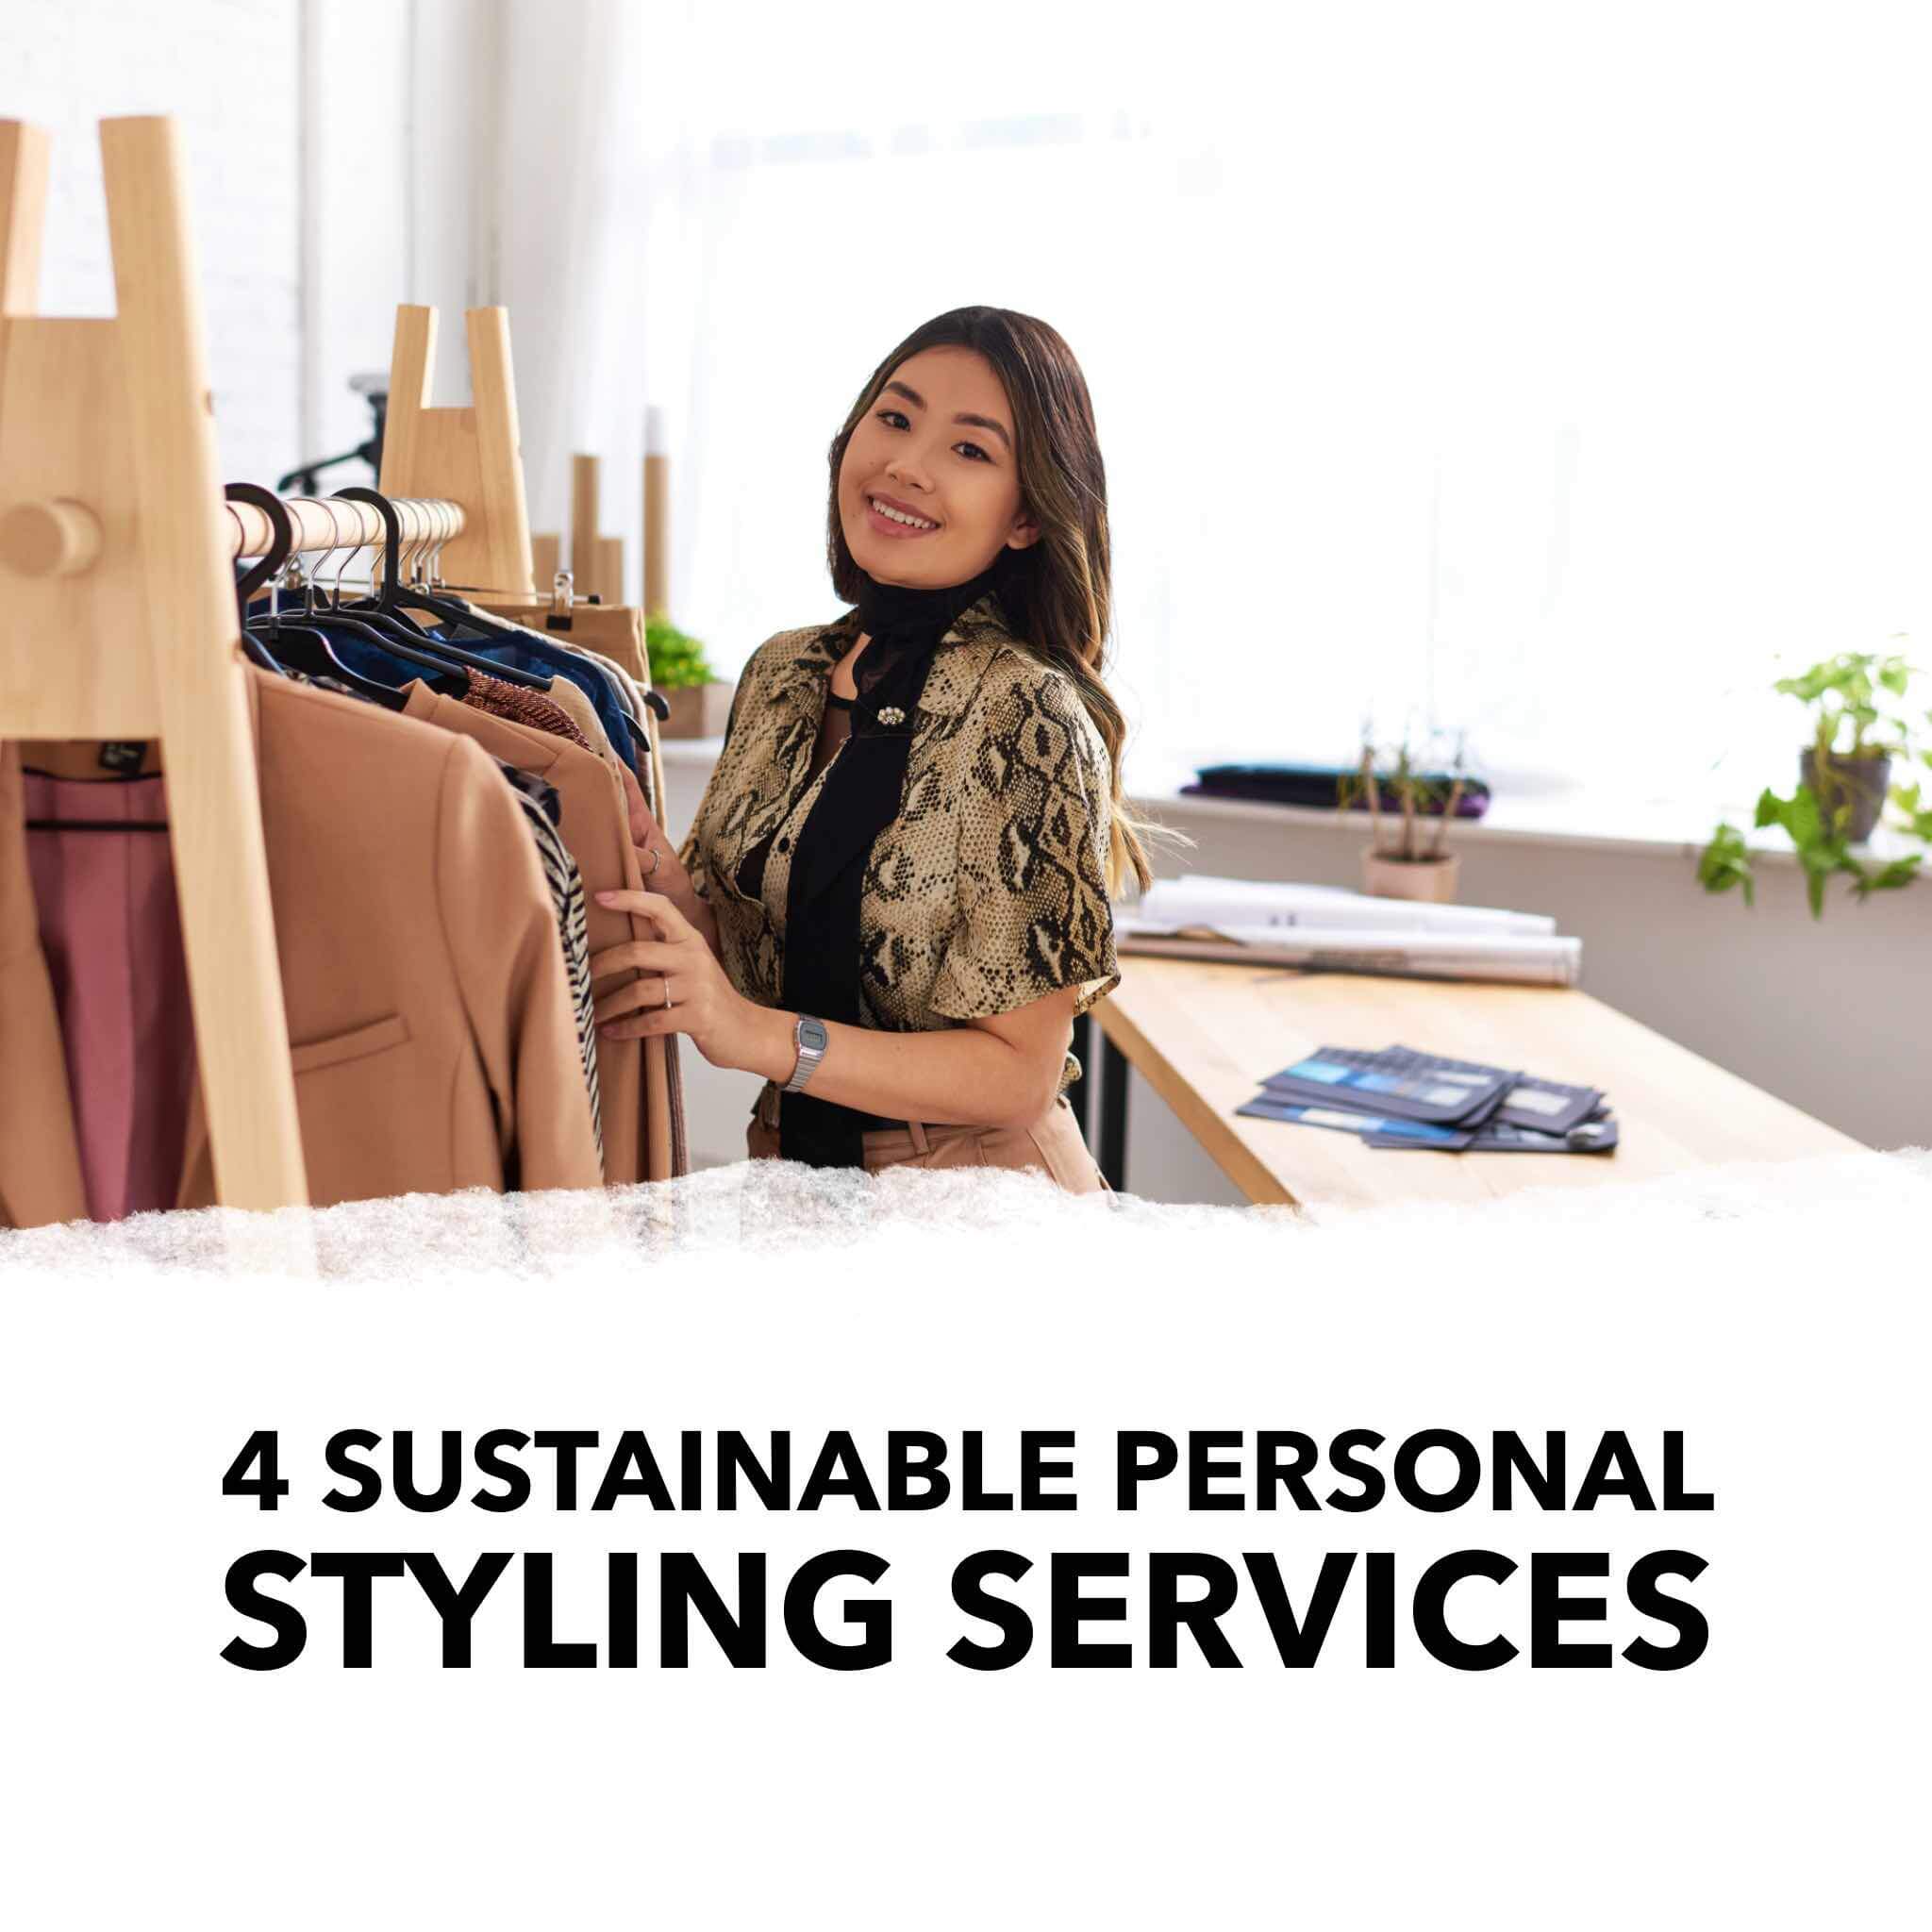 4 sustainable personal styling services